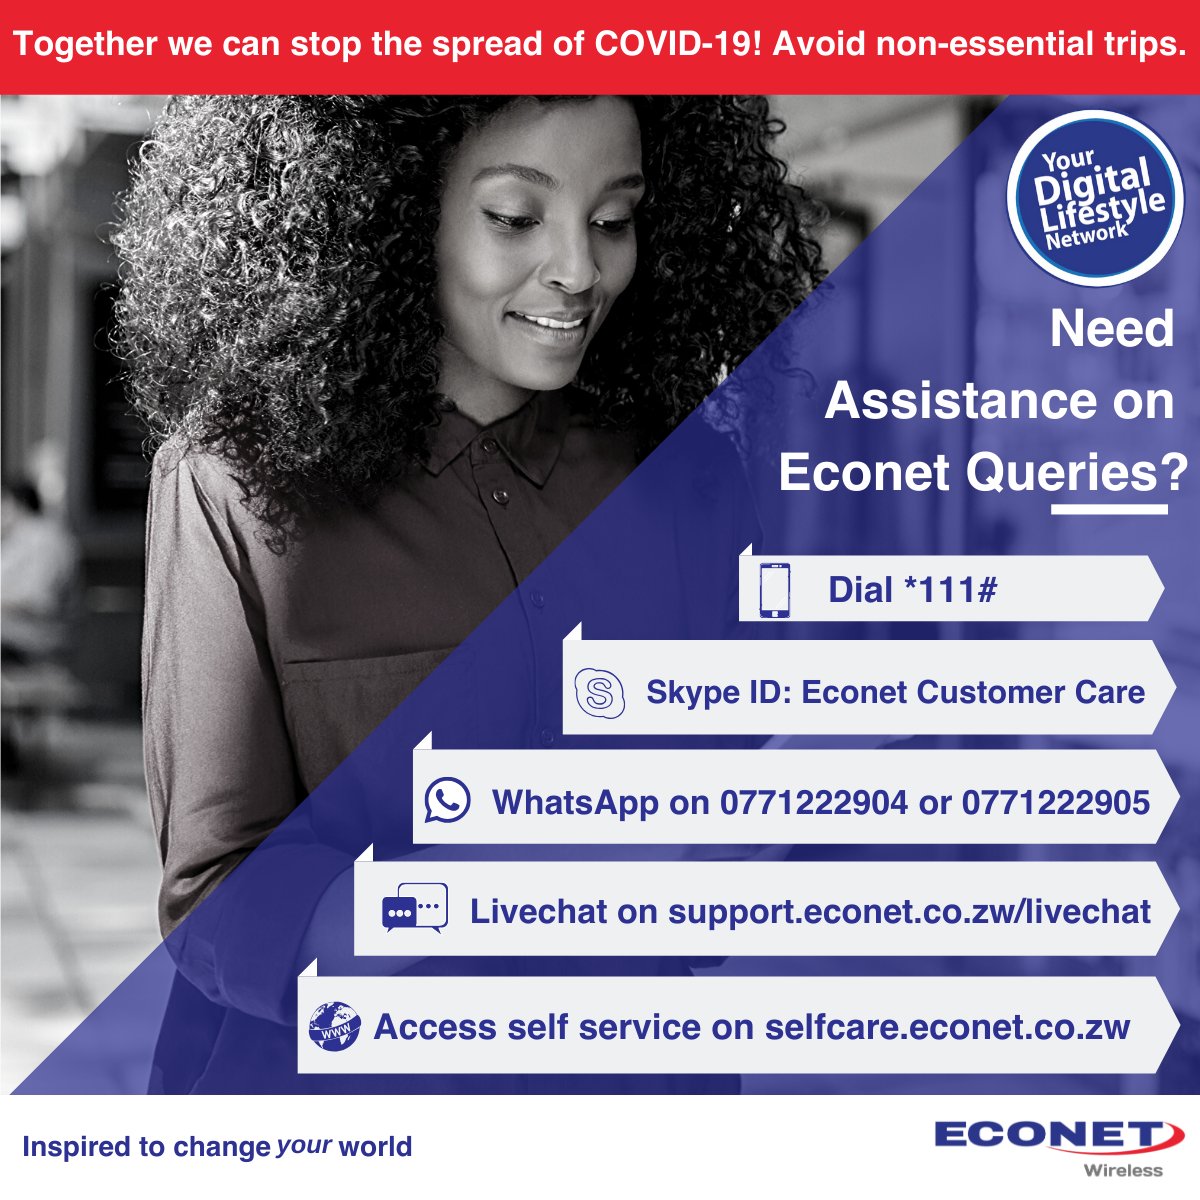 Need assistance on your Econet queries? Initiate self service and get in-touch with us on these channels anytime, anywhere! Avoid public gatherings and non-essential trips! Together we can stop the spread of #COVID19 #OneFightAgainstCorona